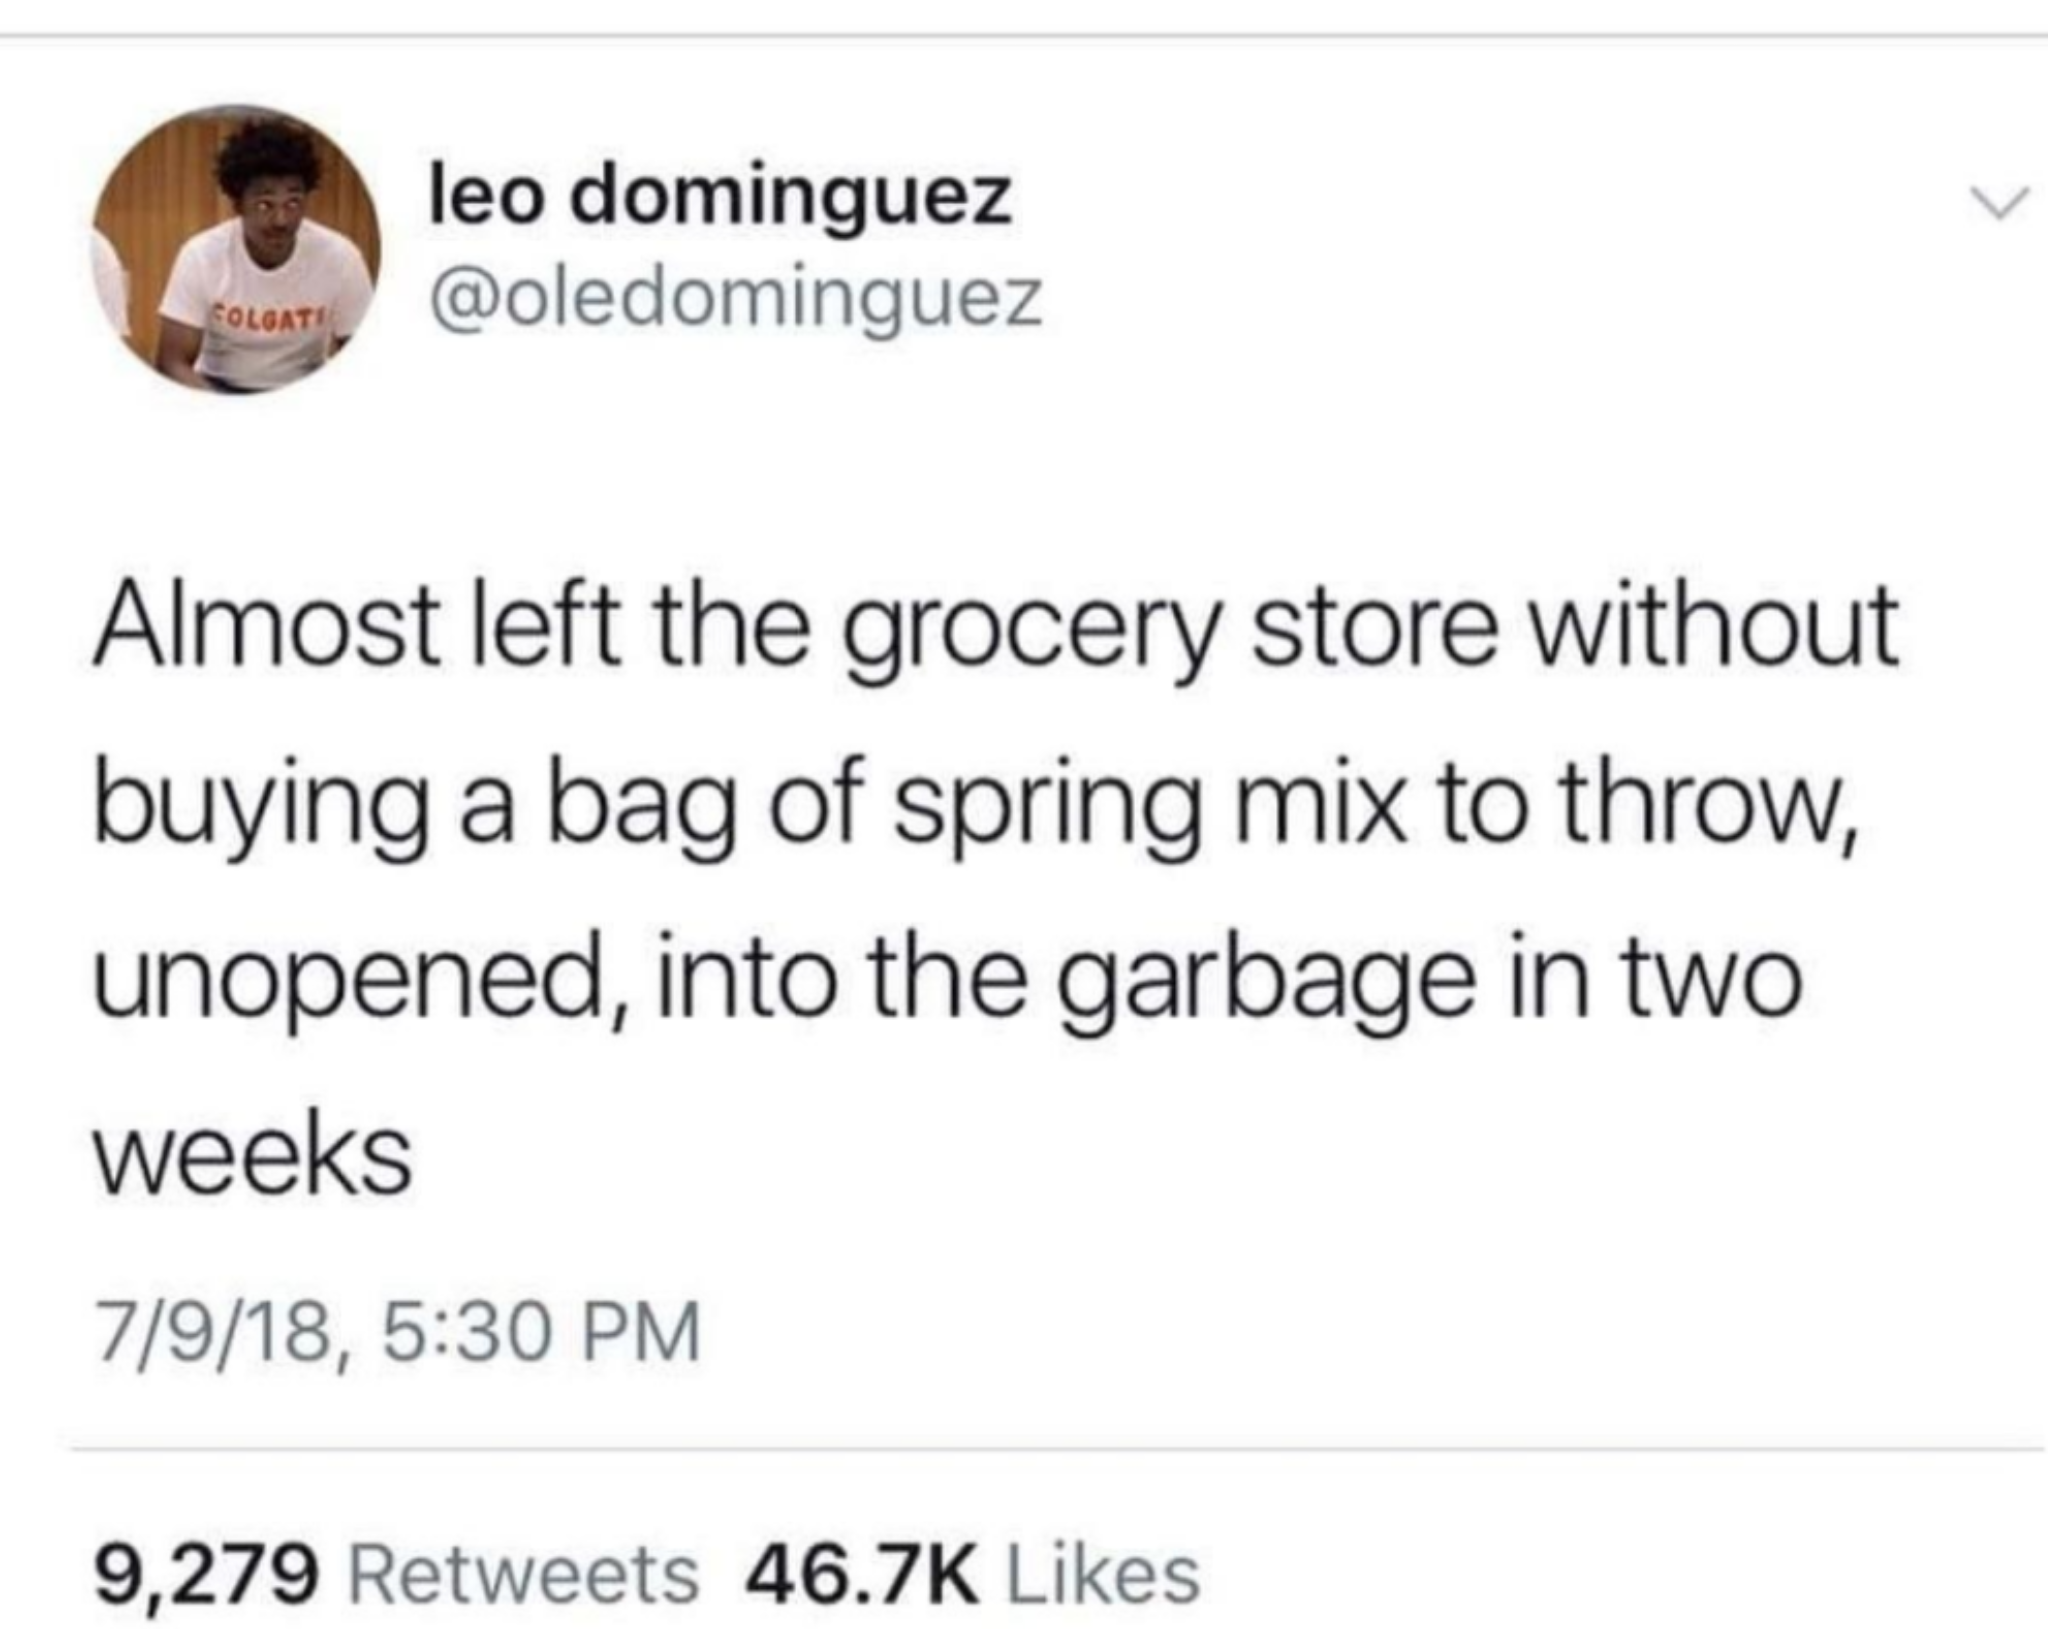 spring mix meme - leo dominguez Tolgati Almost left the grocery store without buying a bag of spring mix to throw, unopened, into the garbage in two weeks 7918, 9,279